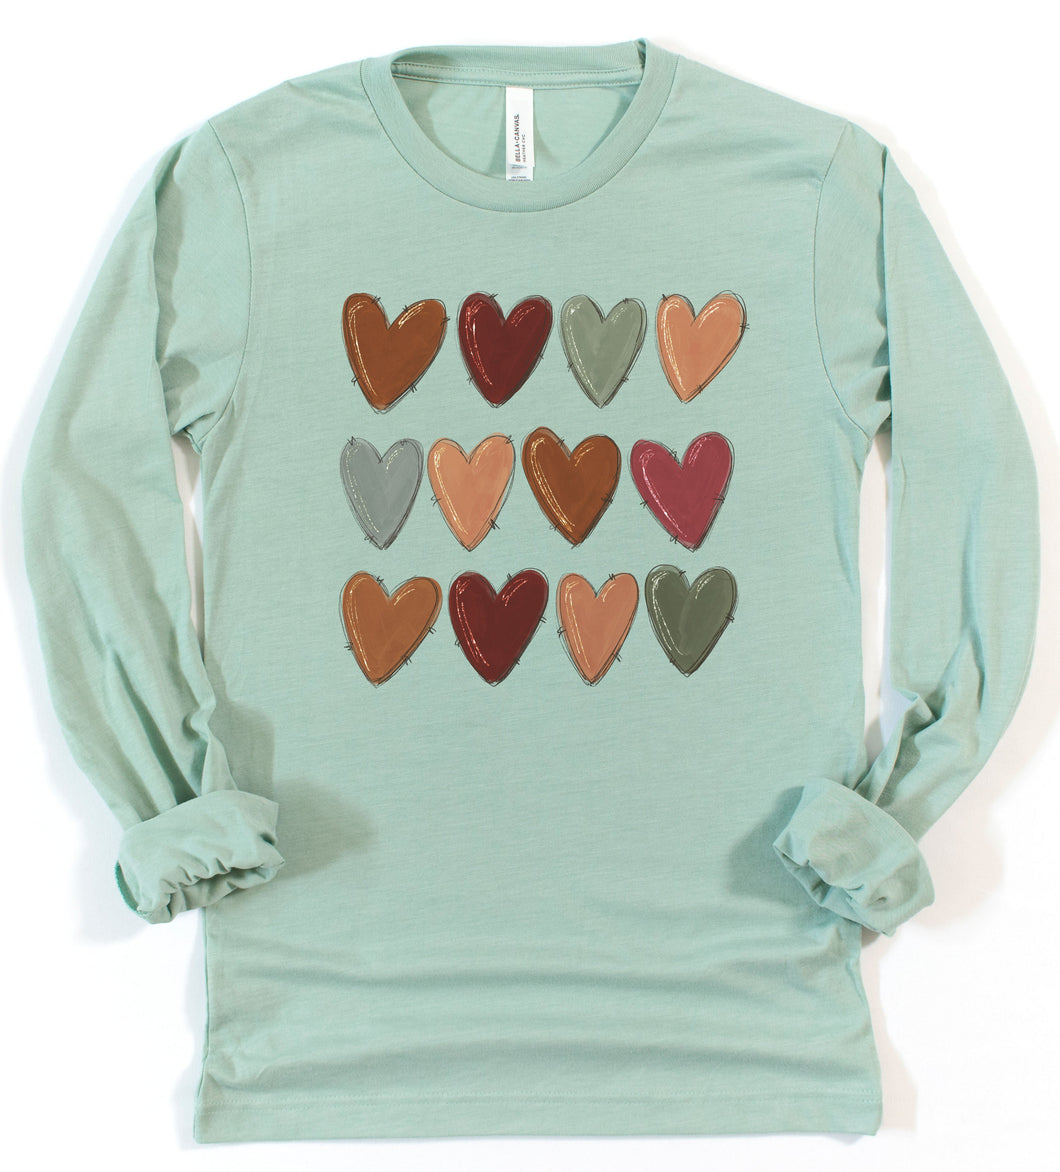 Rows of Hearts Graphic Tee